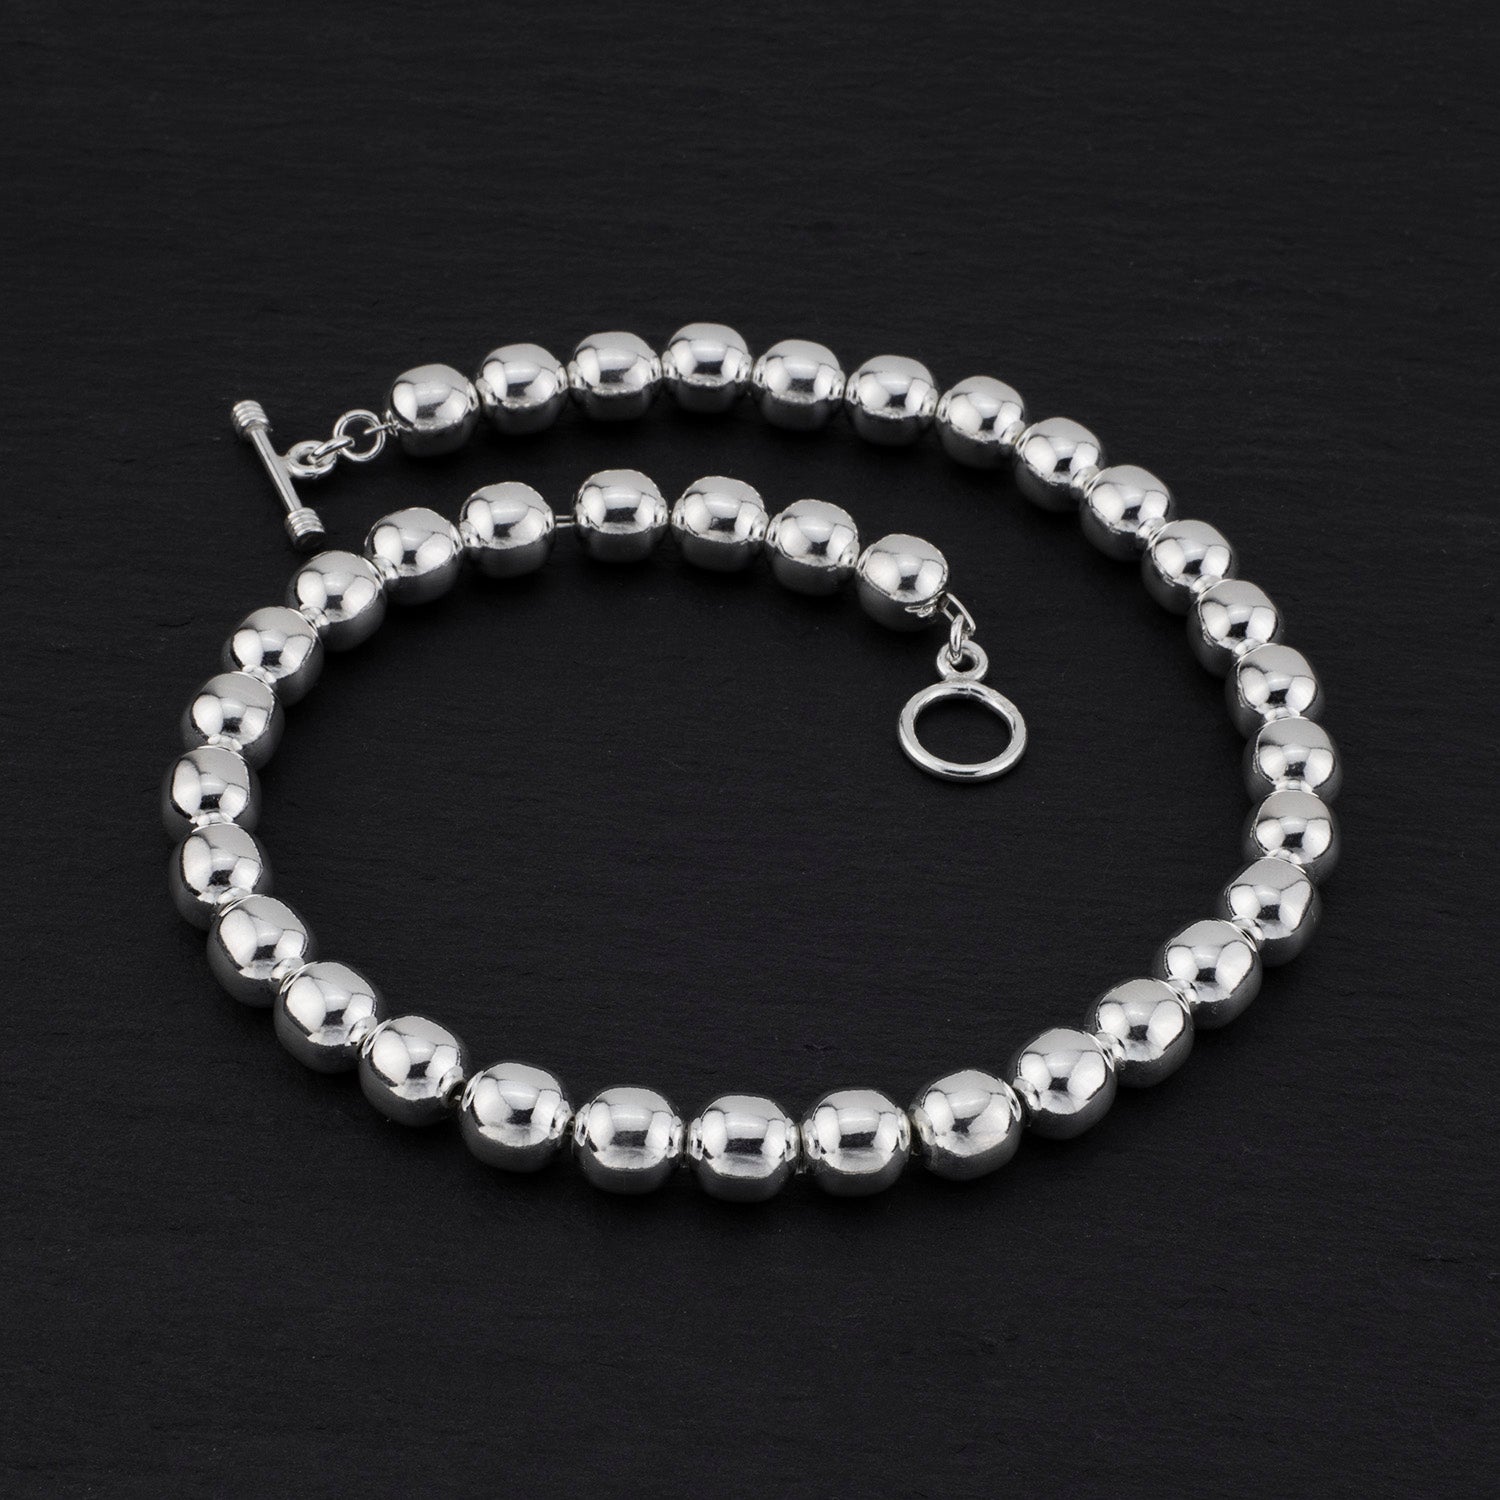 Mexican sterling silver 10mm bead ball necklace